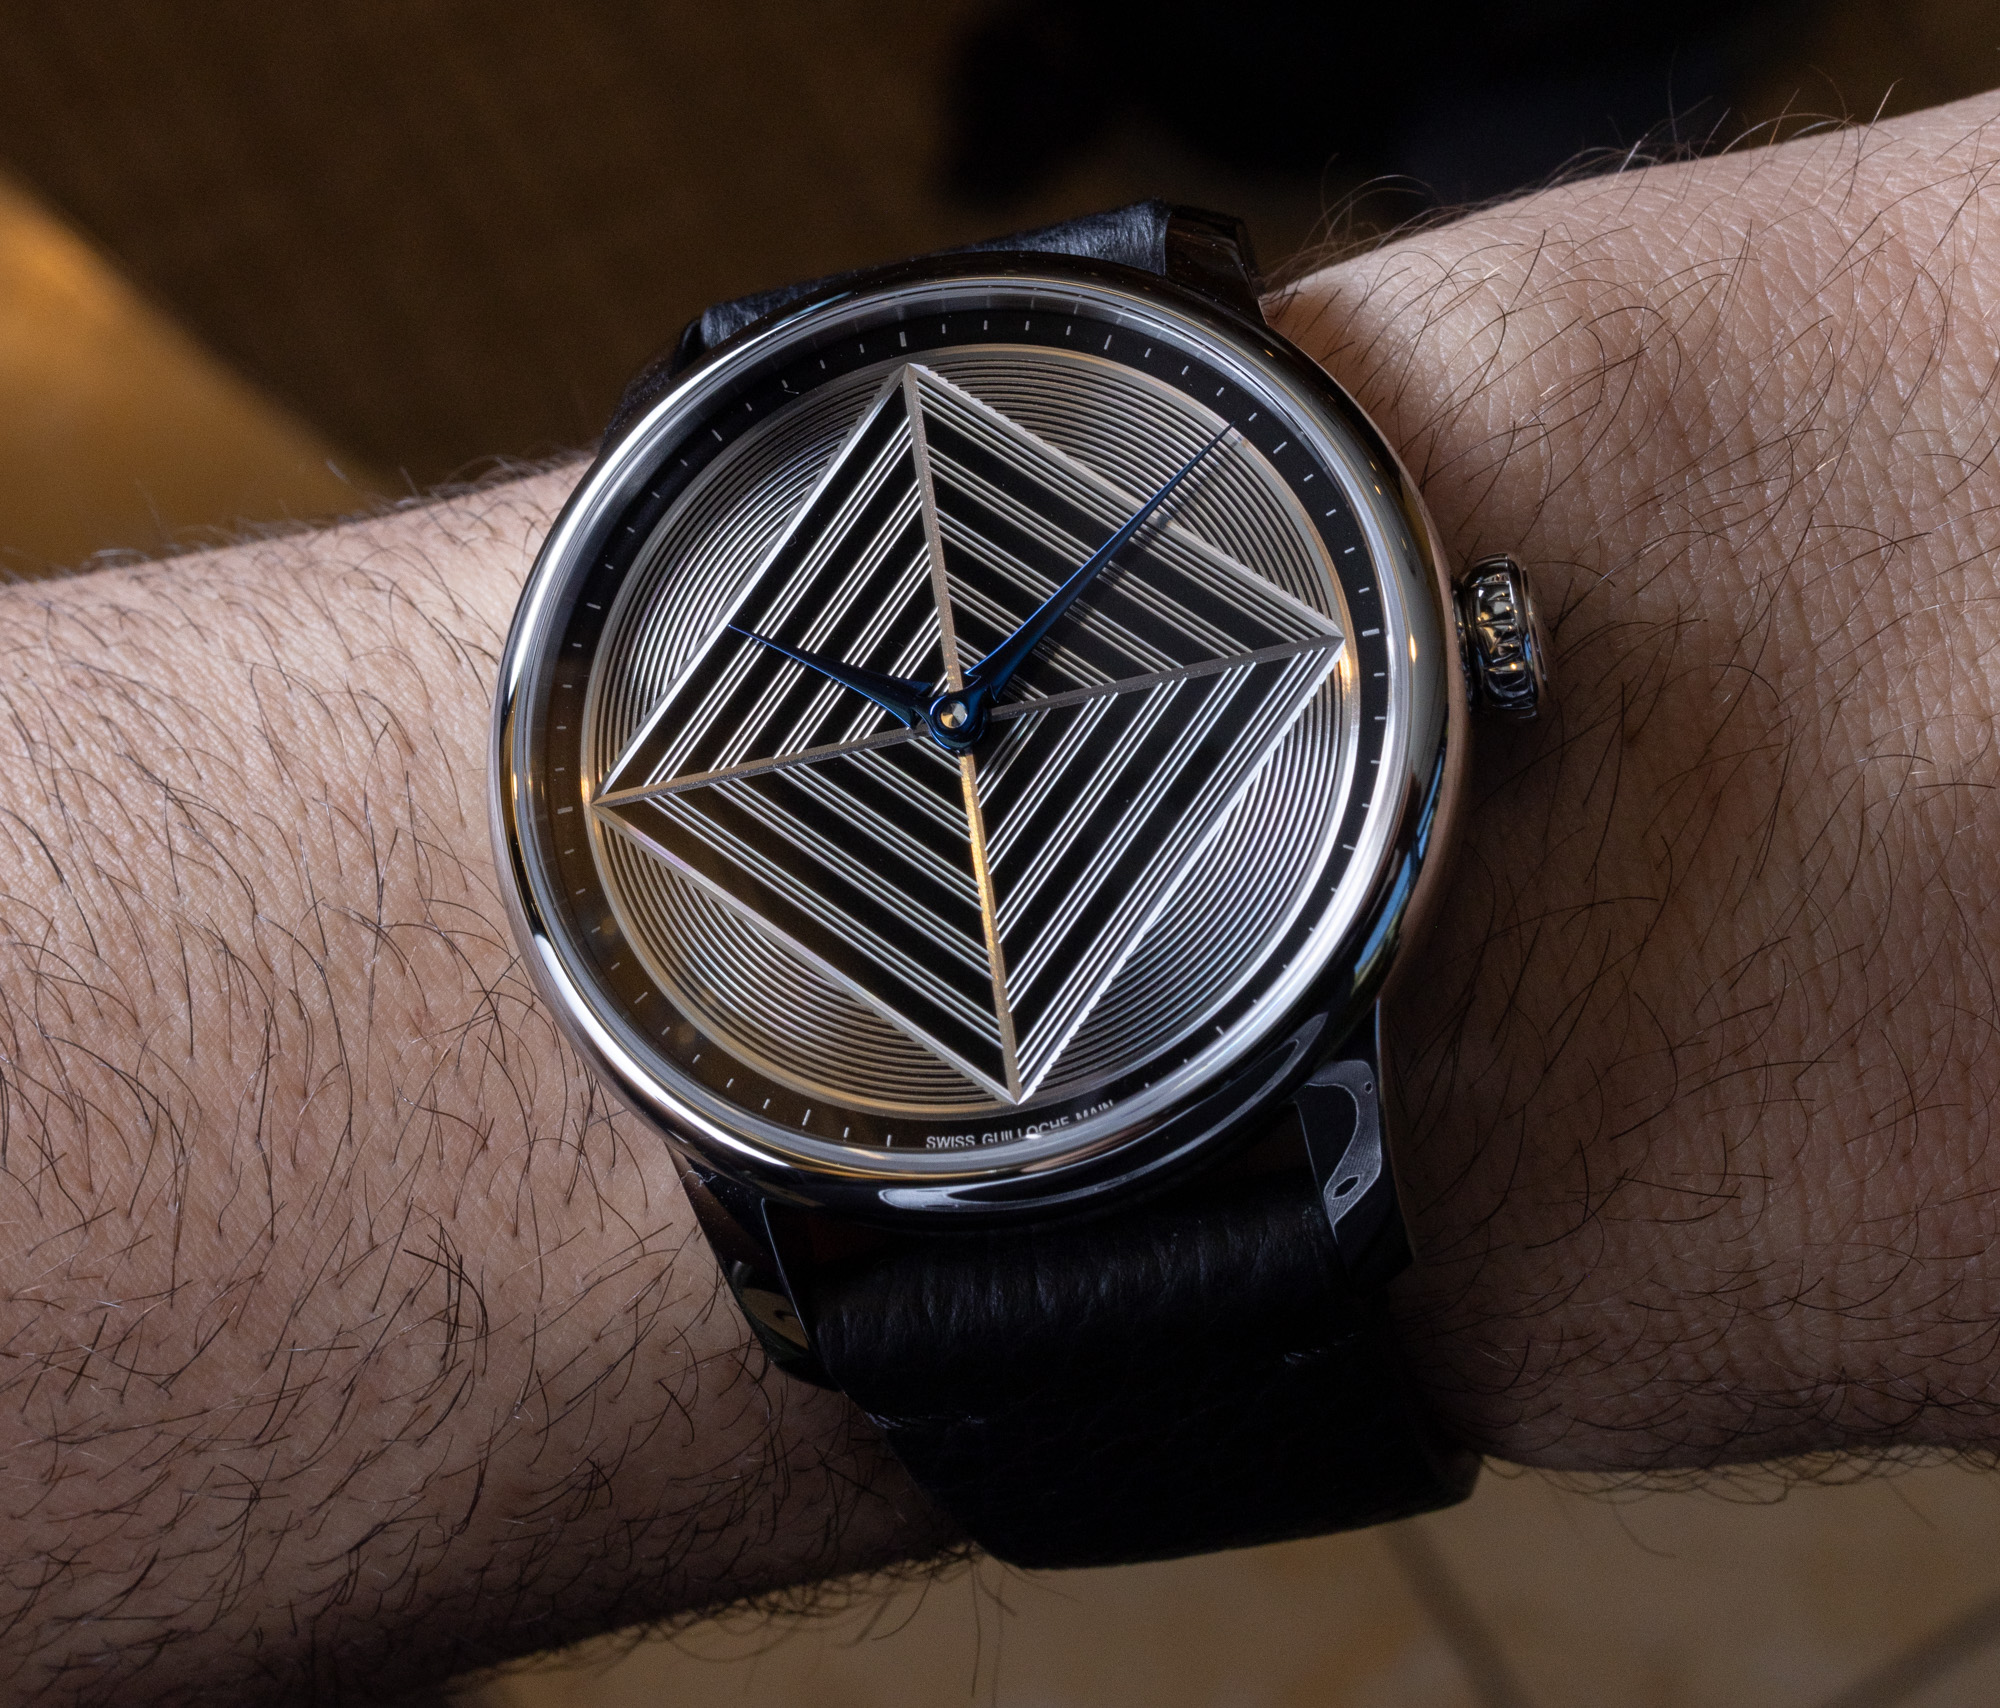 Louis Erard Excellence Guilloché Main Limited Edition - Hands-On, Price